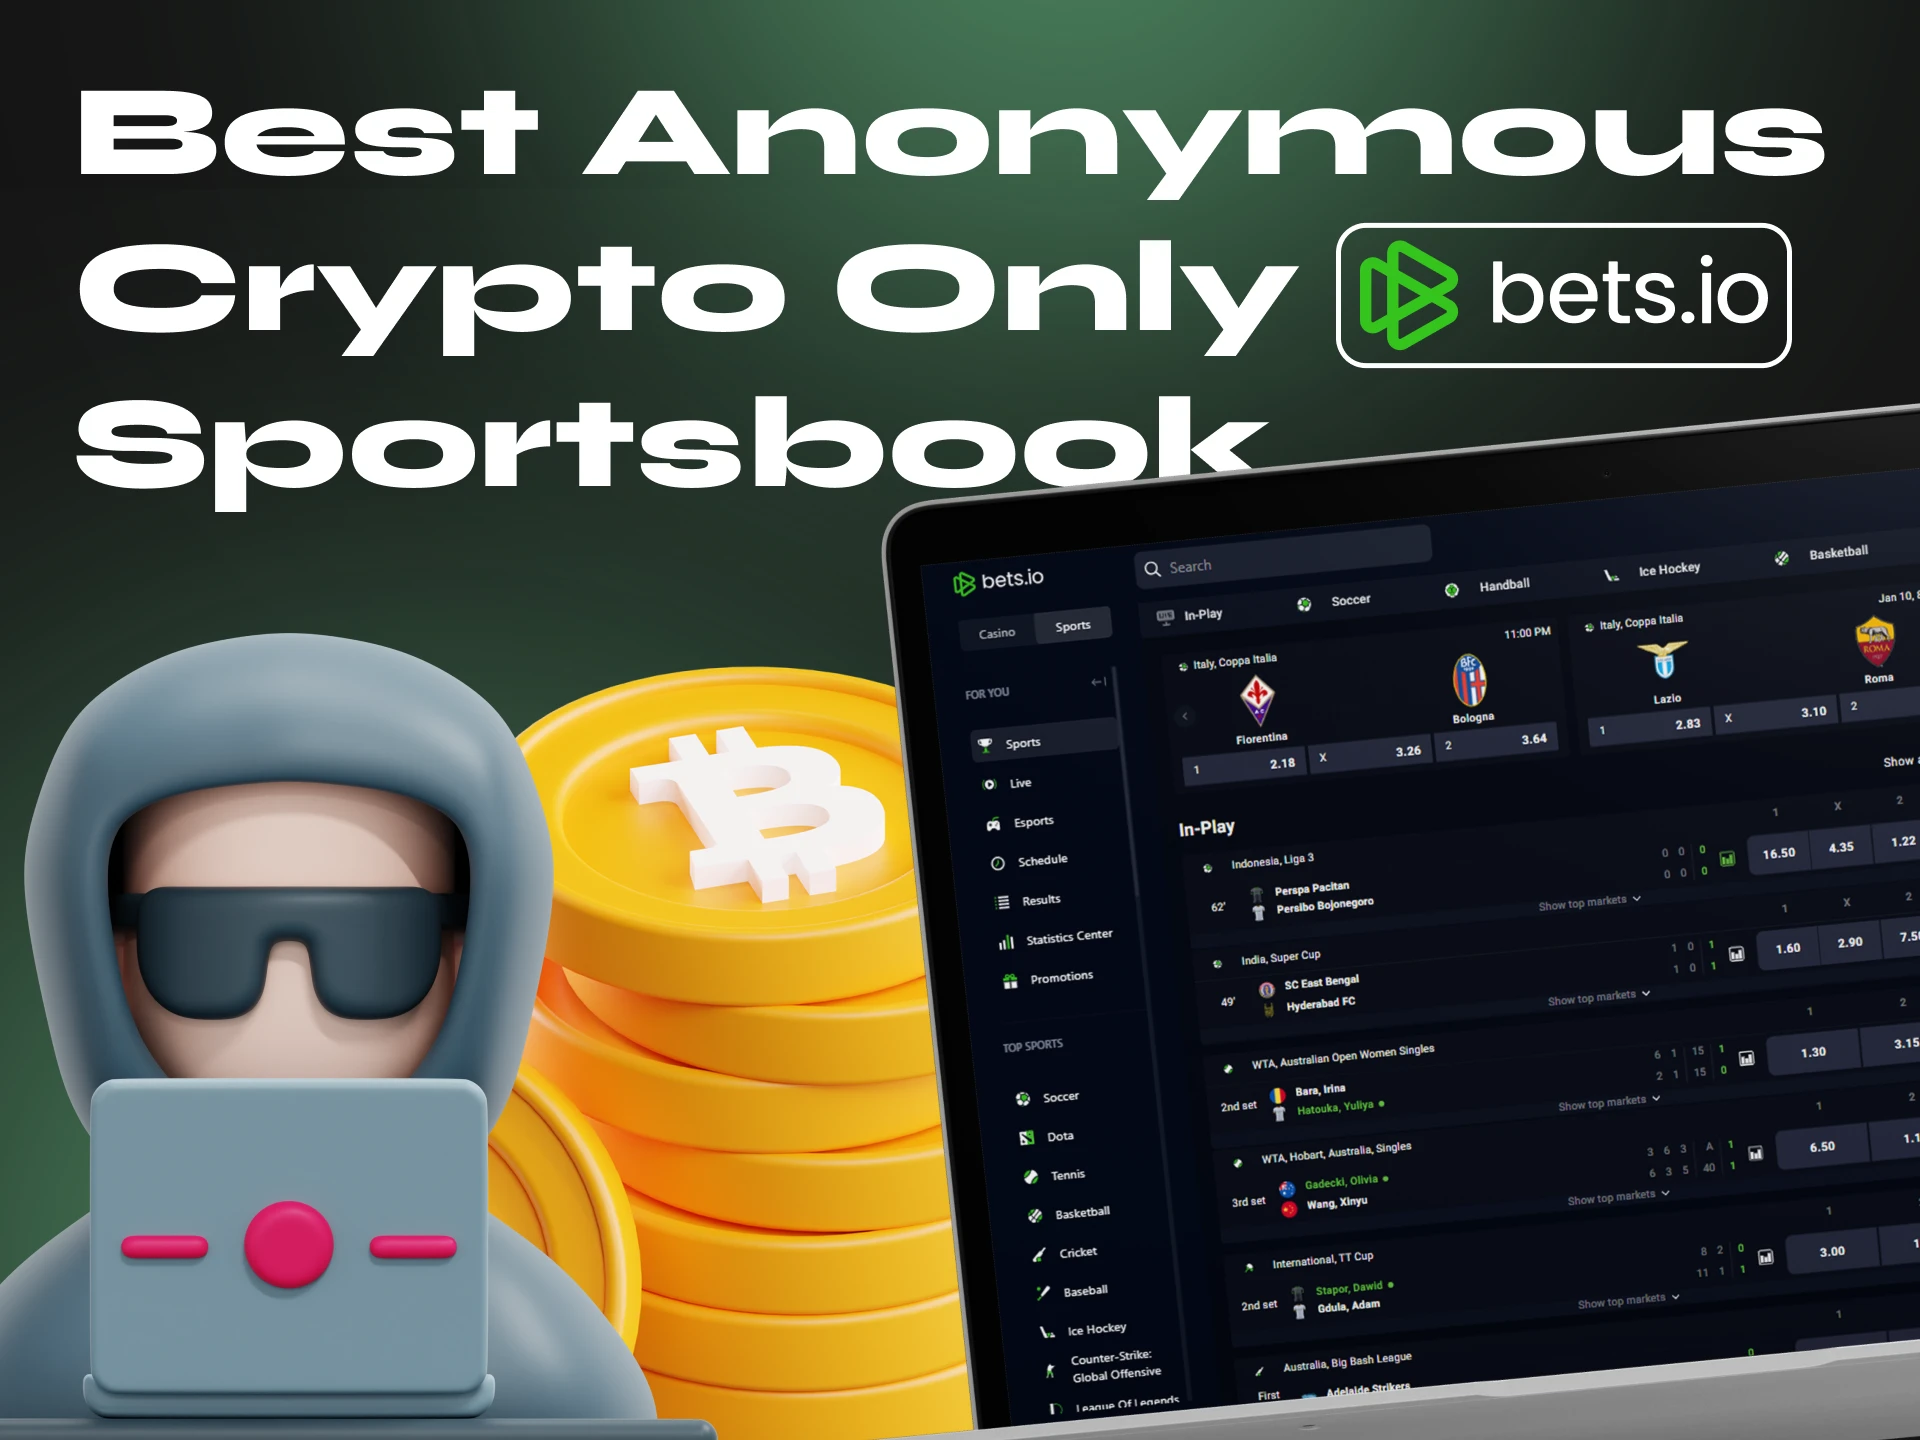 Crypto Casino bets.io provides its users with anonymity and security.